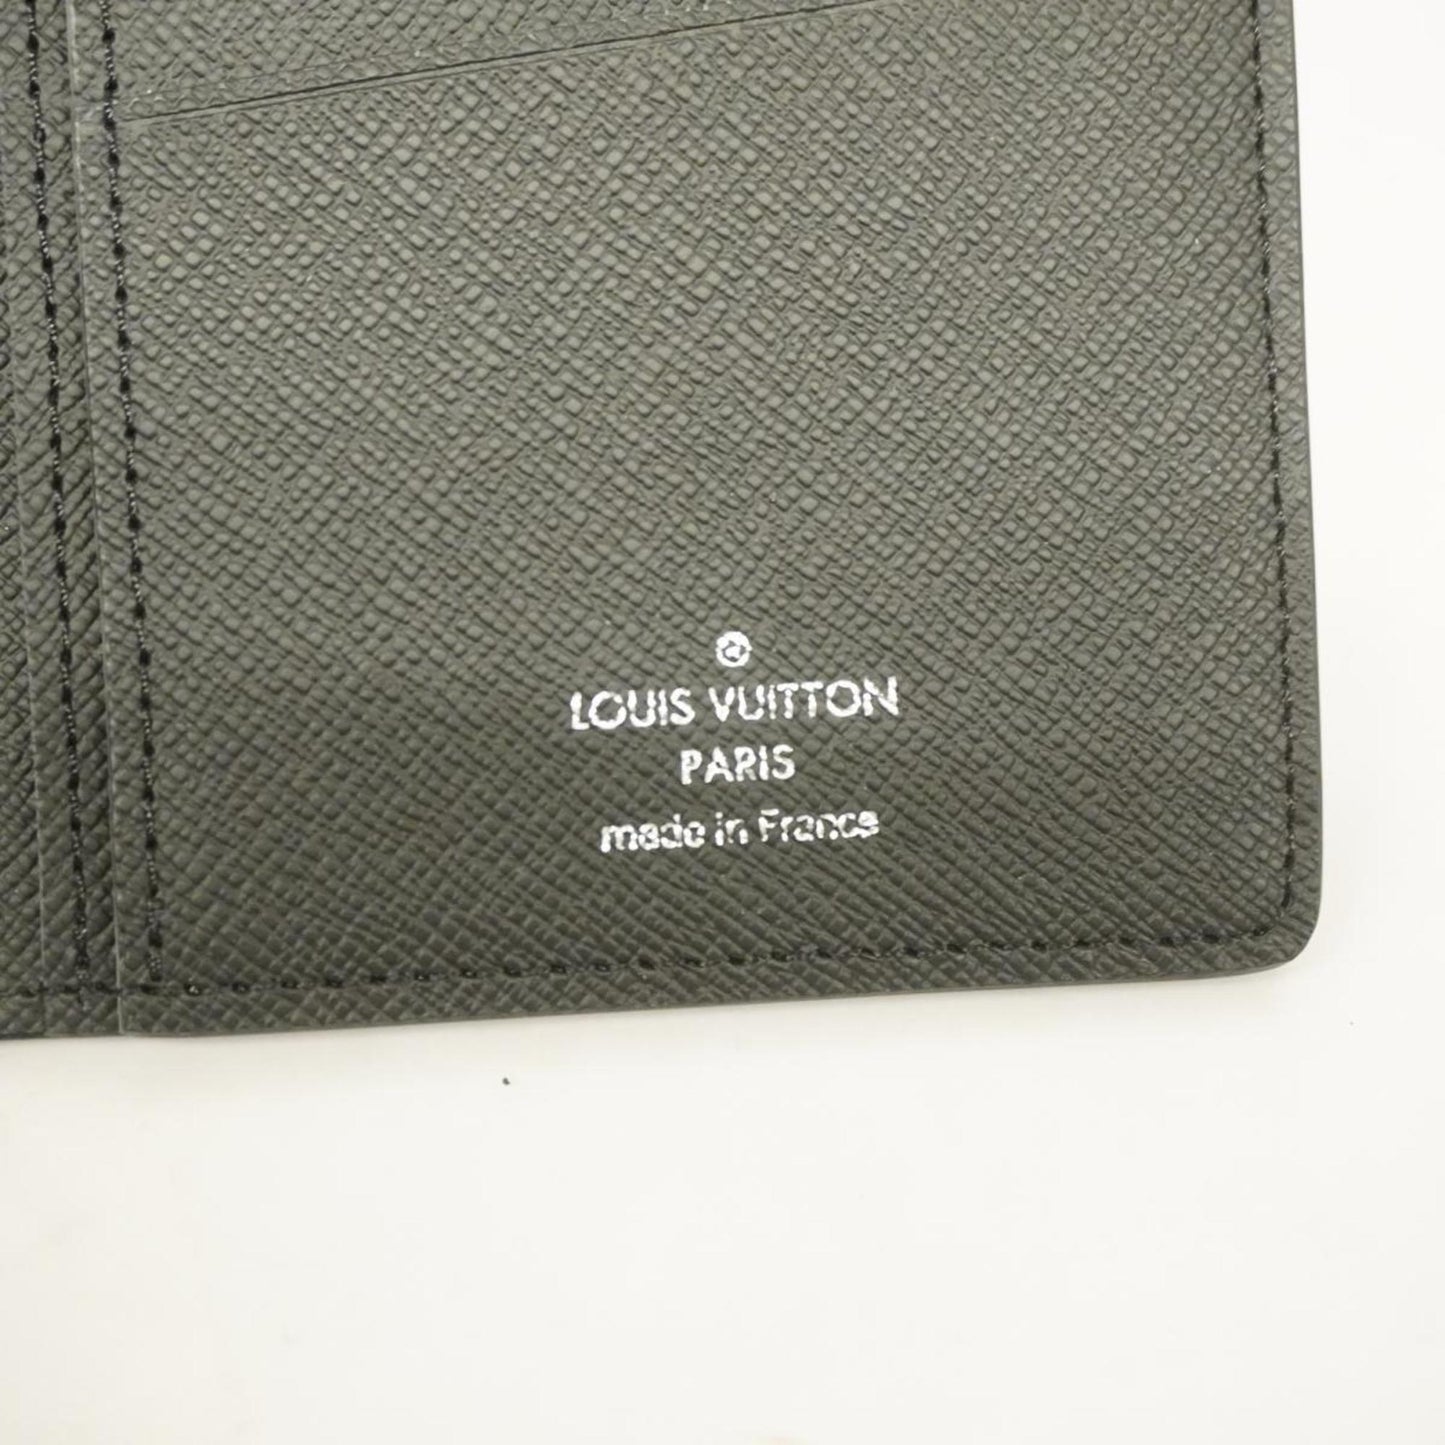 Louis Vuitton Brazza White Leather Wallet  (Pre-Owned)